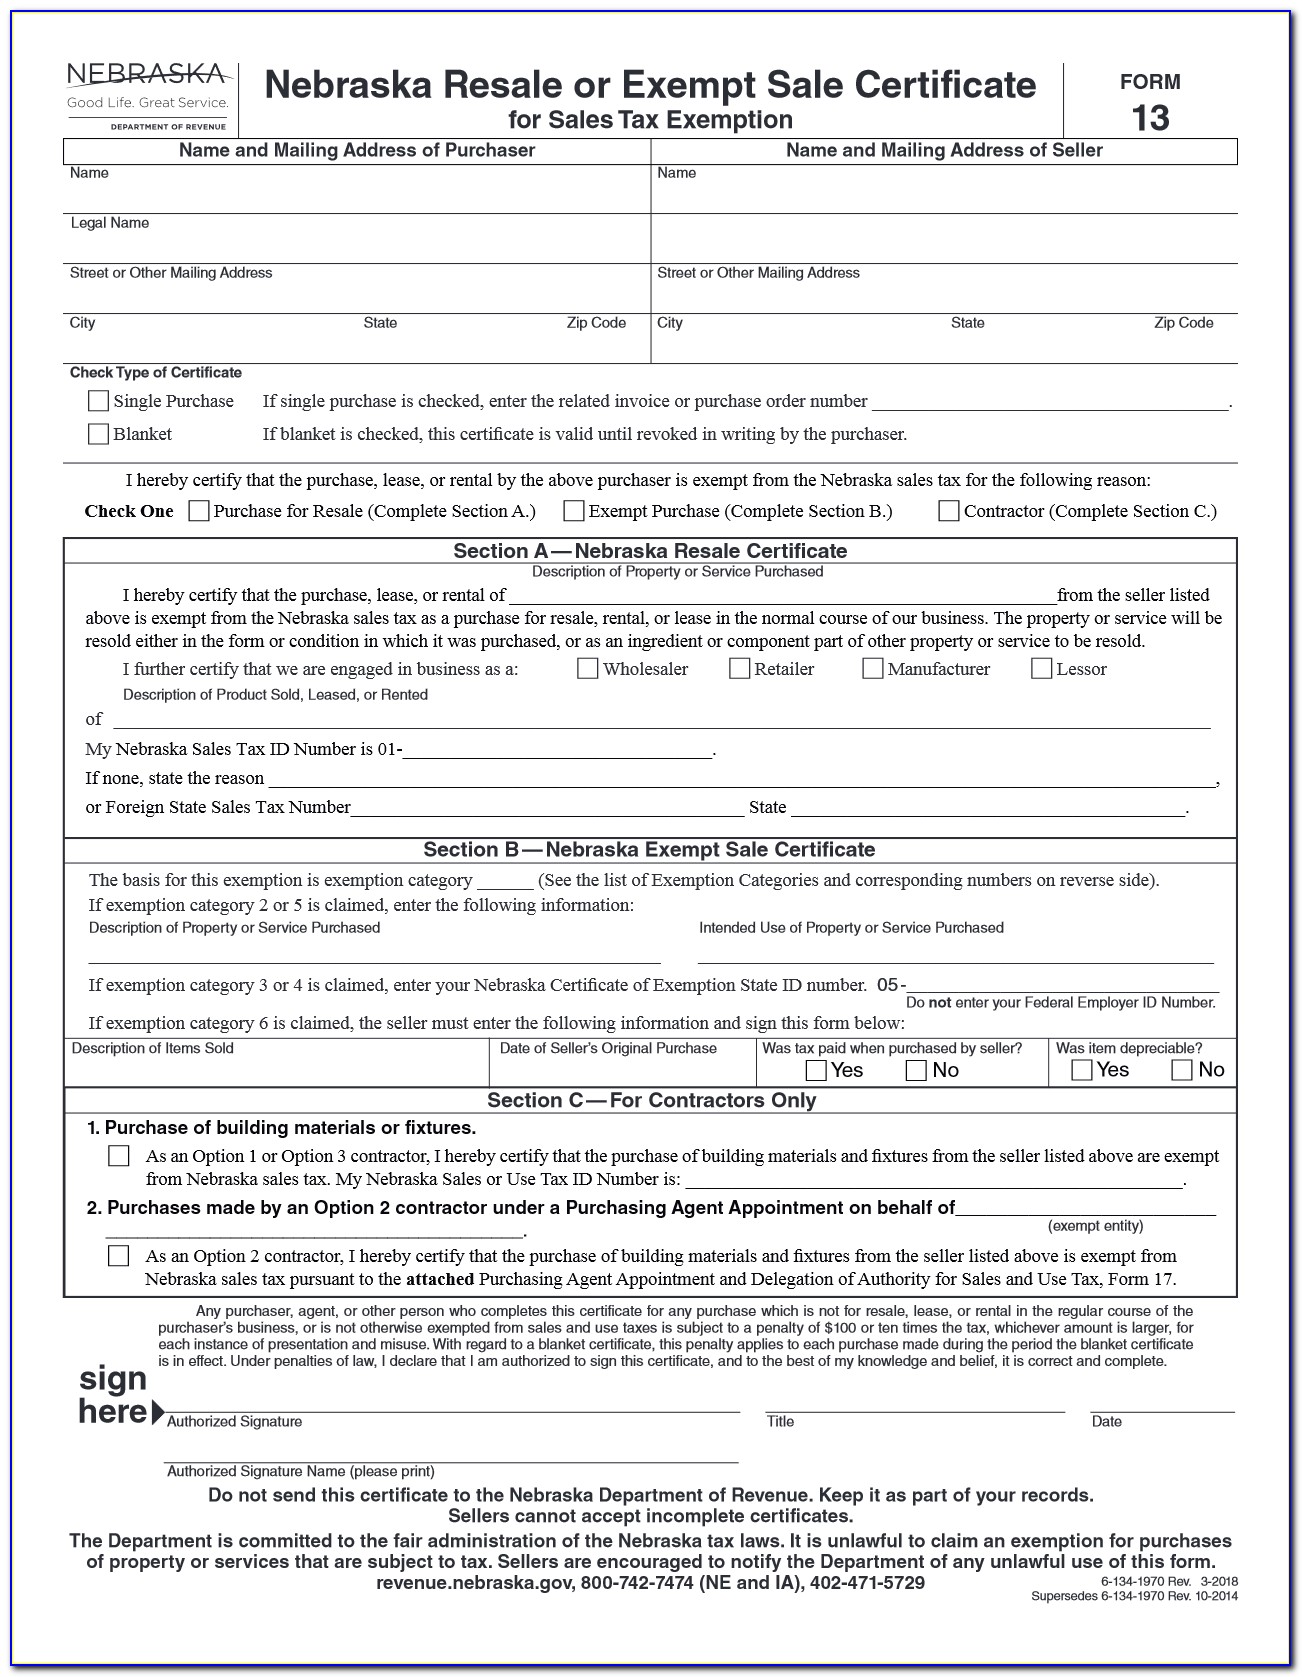 Monterey County Marriage License Requirements